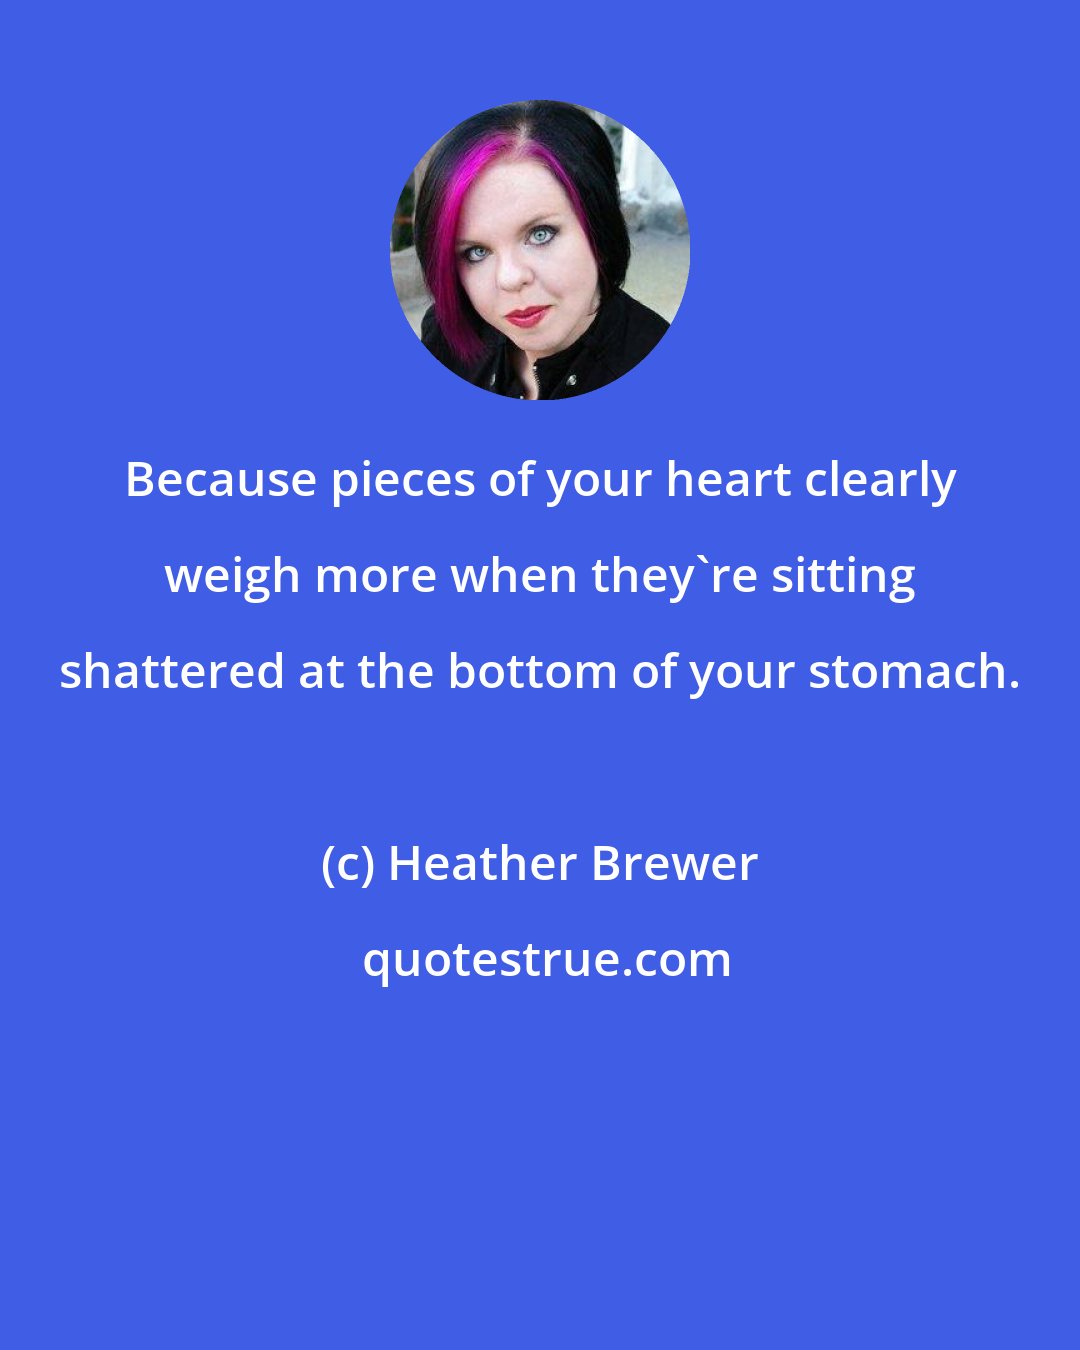 Heather Brewer: Because pieces of your heart clearly weigh more when they're sitting shattered at the bottom of your stomach.